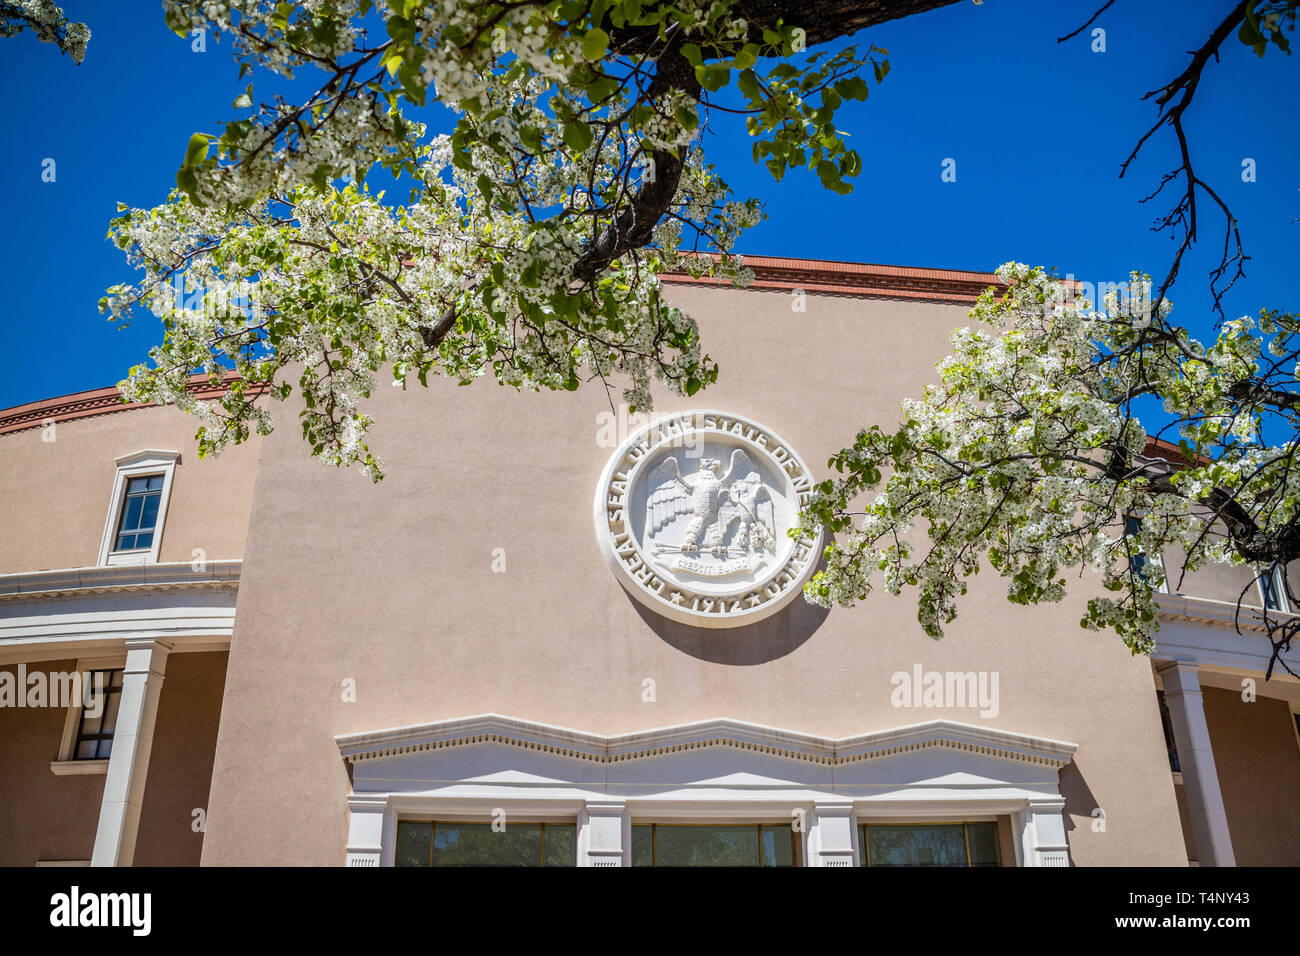 Santa Fe, NM, USA - April 14, 2018: The Great Seal of the State of New Mexico Stock Photo